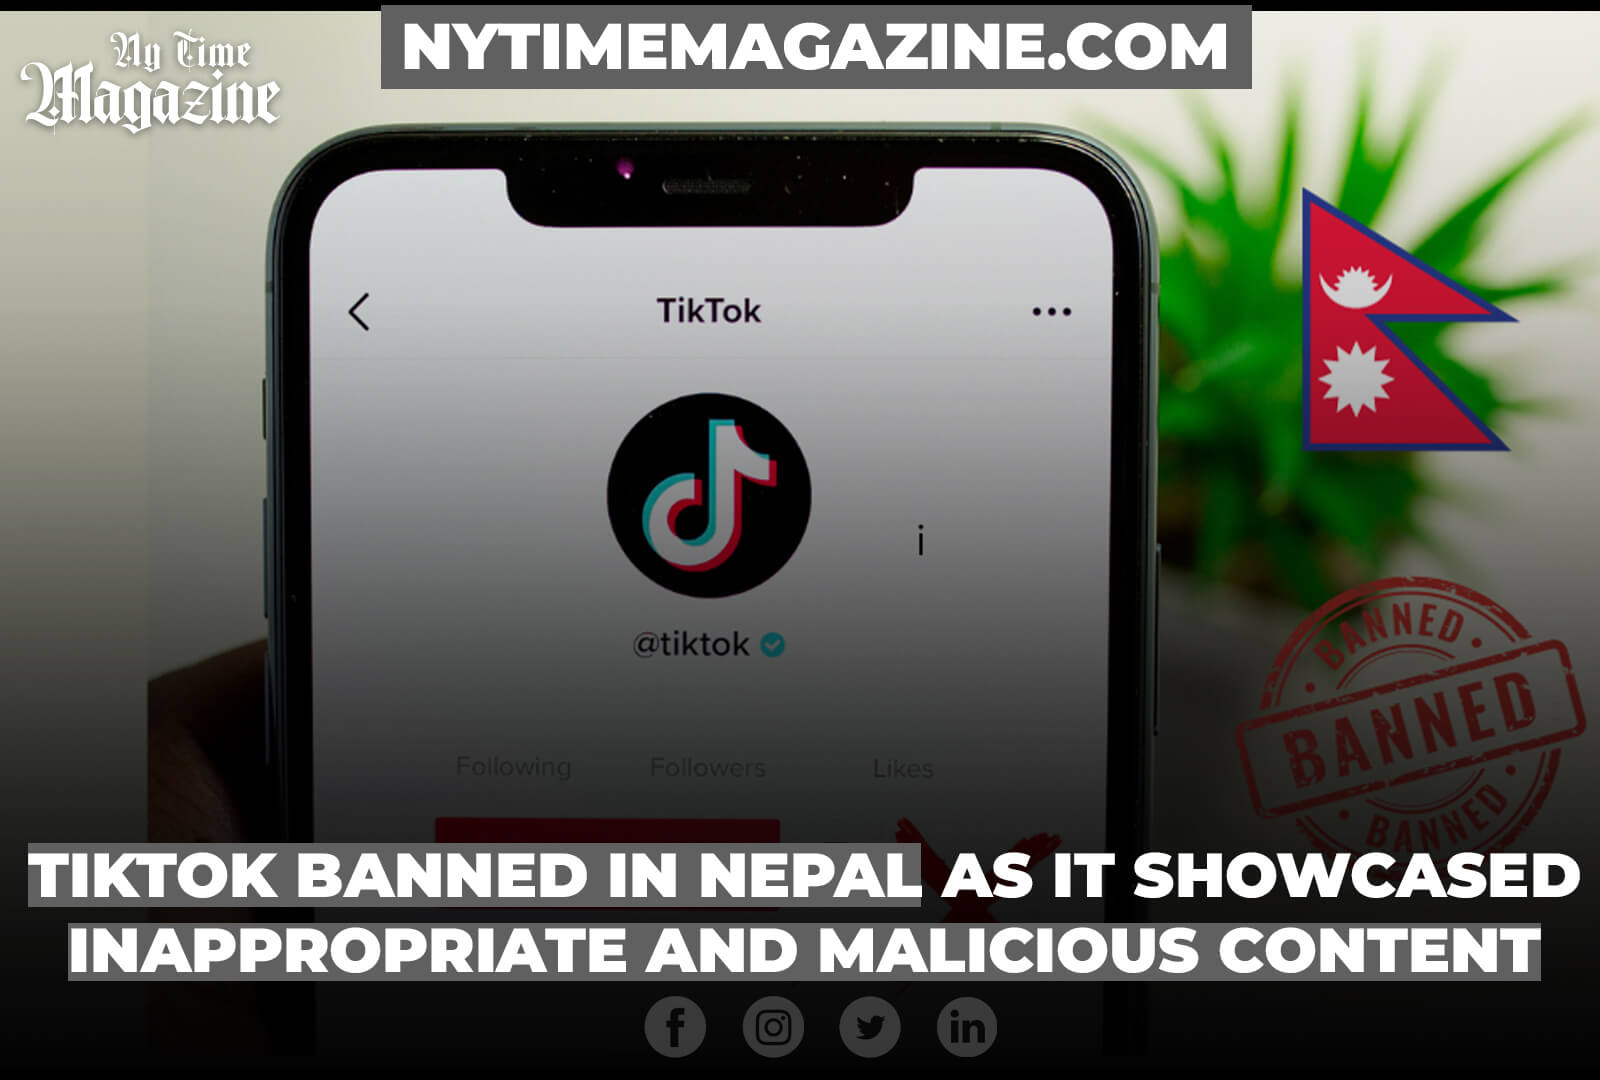 TikTok Banned in Nepal as It Showcased Inappropriate and Malicious Content